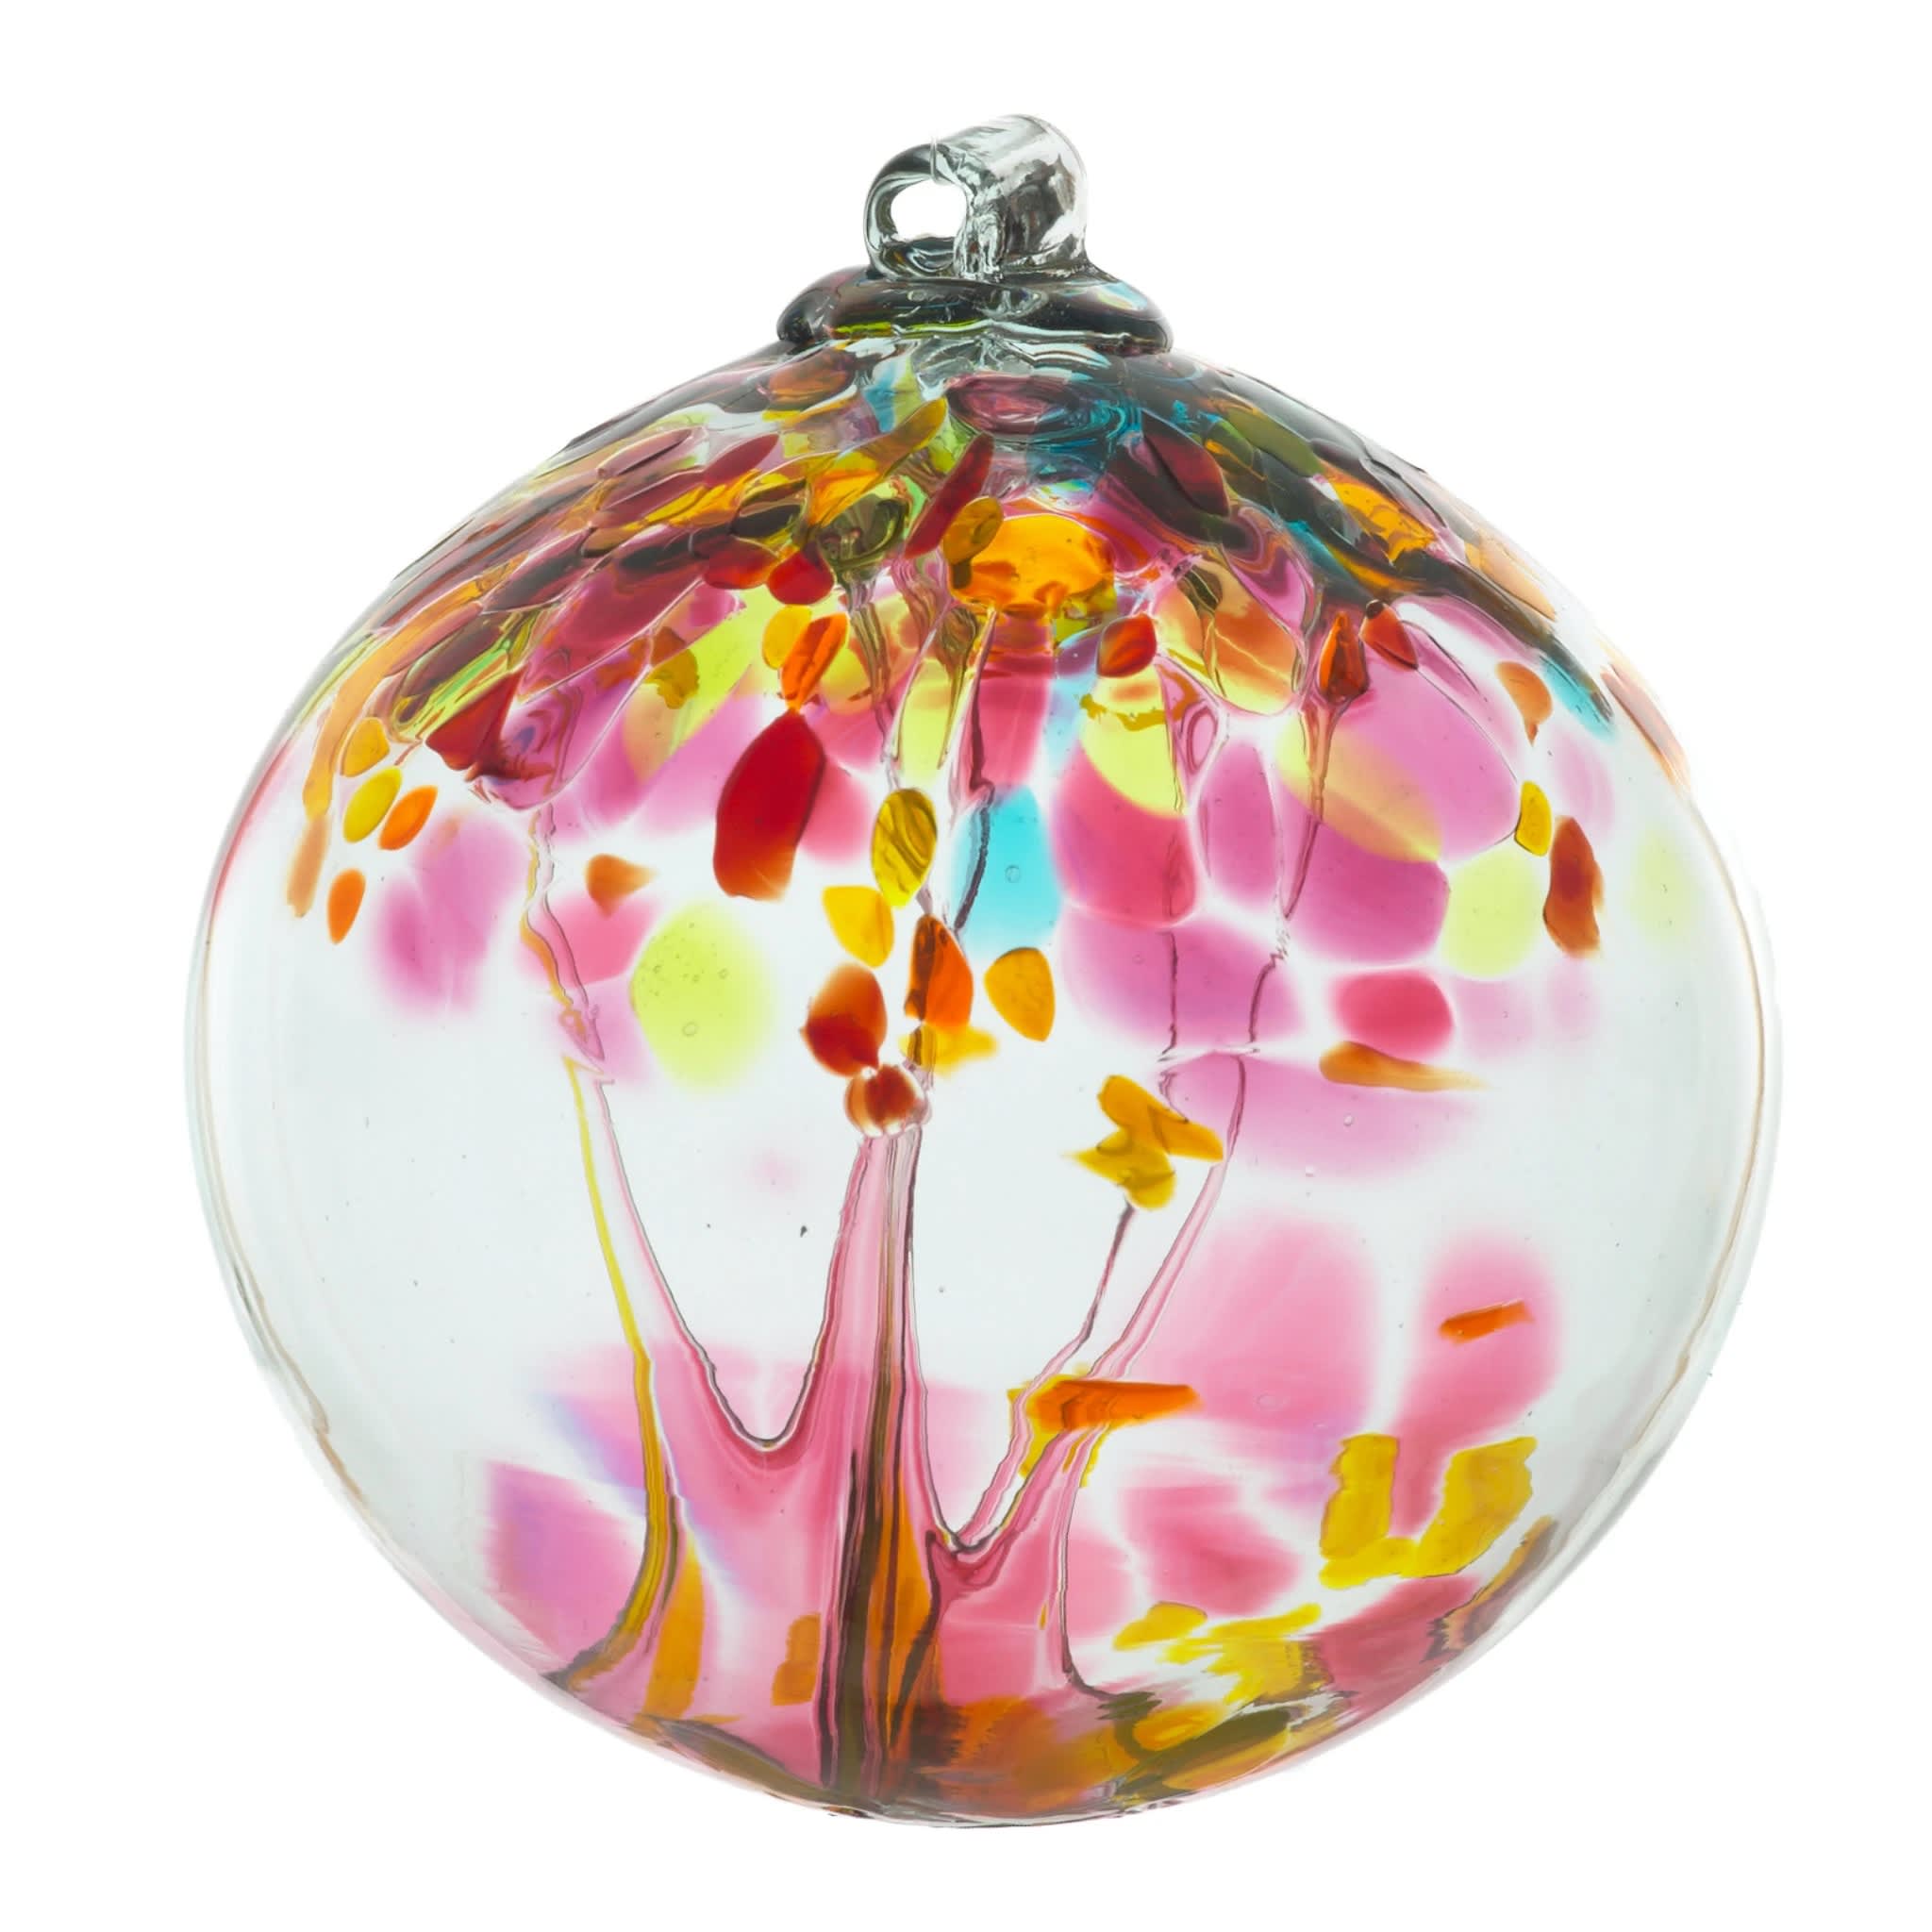 Tree of Motherhood Ornament - Kitras Art Glass - Select &quot;Standard&quot; to order the 2'' ornament, or select &quot;Deluxe&quot; to order the 6'' variation.  Handblown Glass Ornament - Like trees in a forest, no two are alike, with a special sentiment for each theme. Enjoy the magic of the seasons or give the gift of inspiration with these unique glass ornaments, ready to give in a gift box.  A mother nurtures and cares for you and helps you to grow to your fullest potential, just as a tree when it is nurtured. A mother can be the person who gave birth to you or the person who has helped to guide and support you as you make your way through the journey of life. The Tree of Motherhood reminds us to celebrate mothers and the important role that they play in our lives.